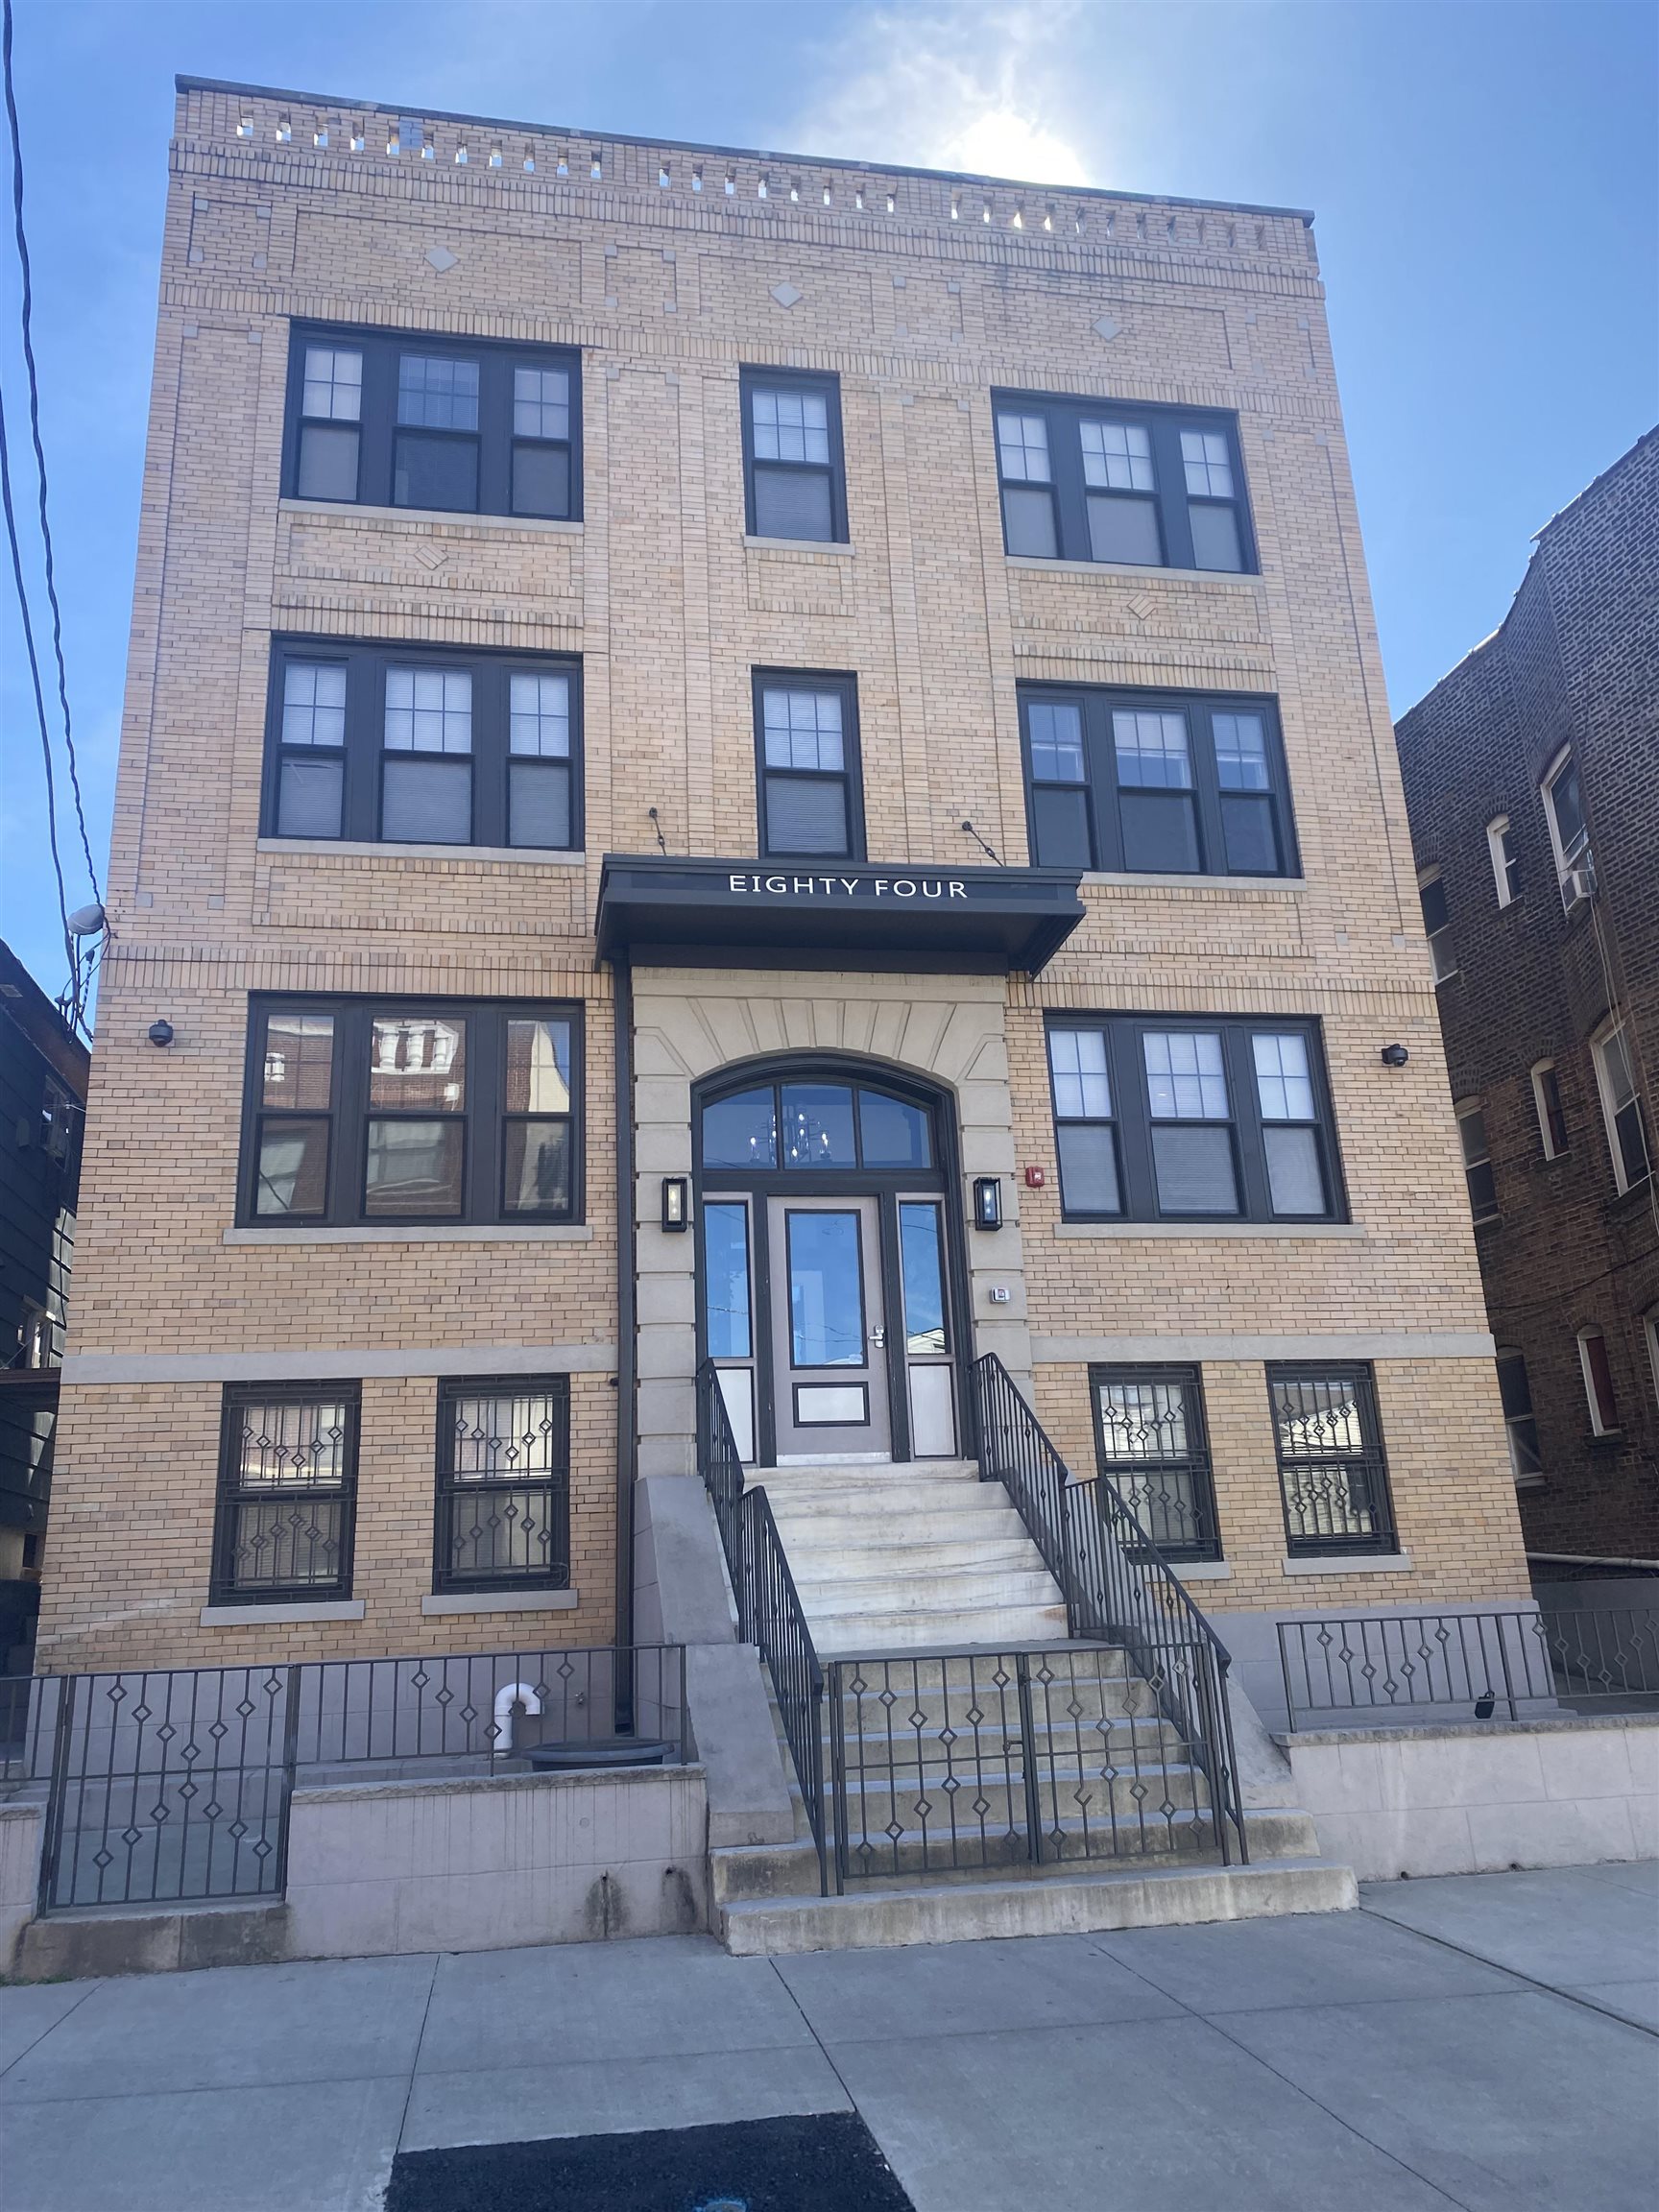 # 240006747 - For Rent in JERSEY CITY - Journal Square NJ